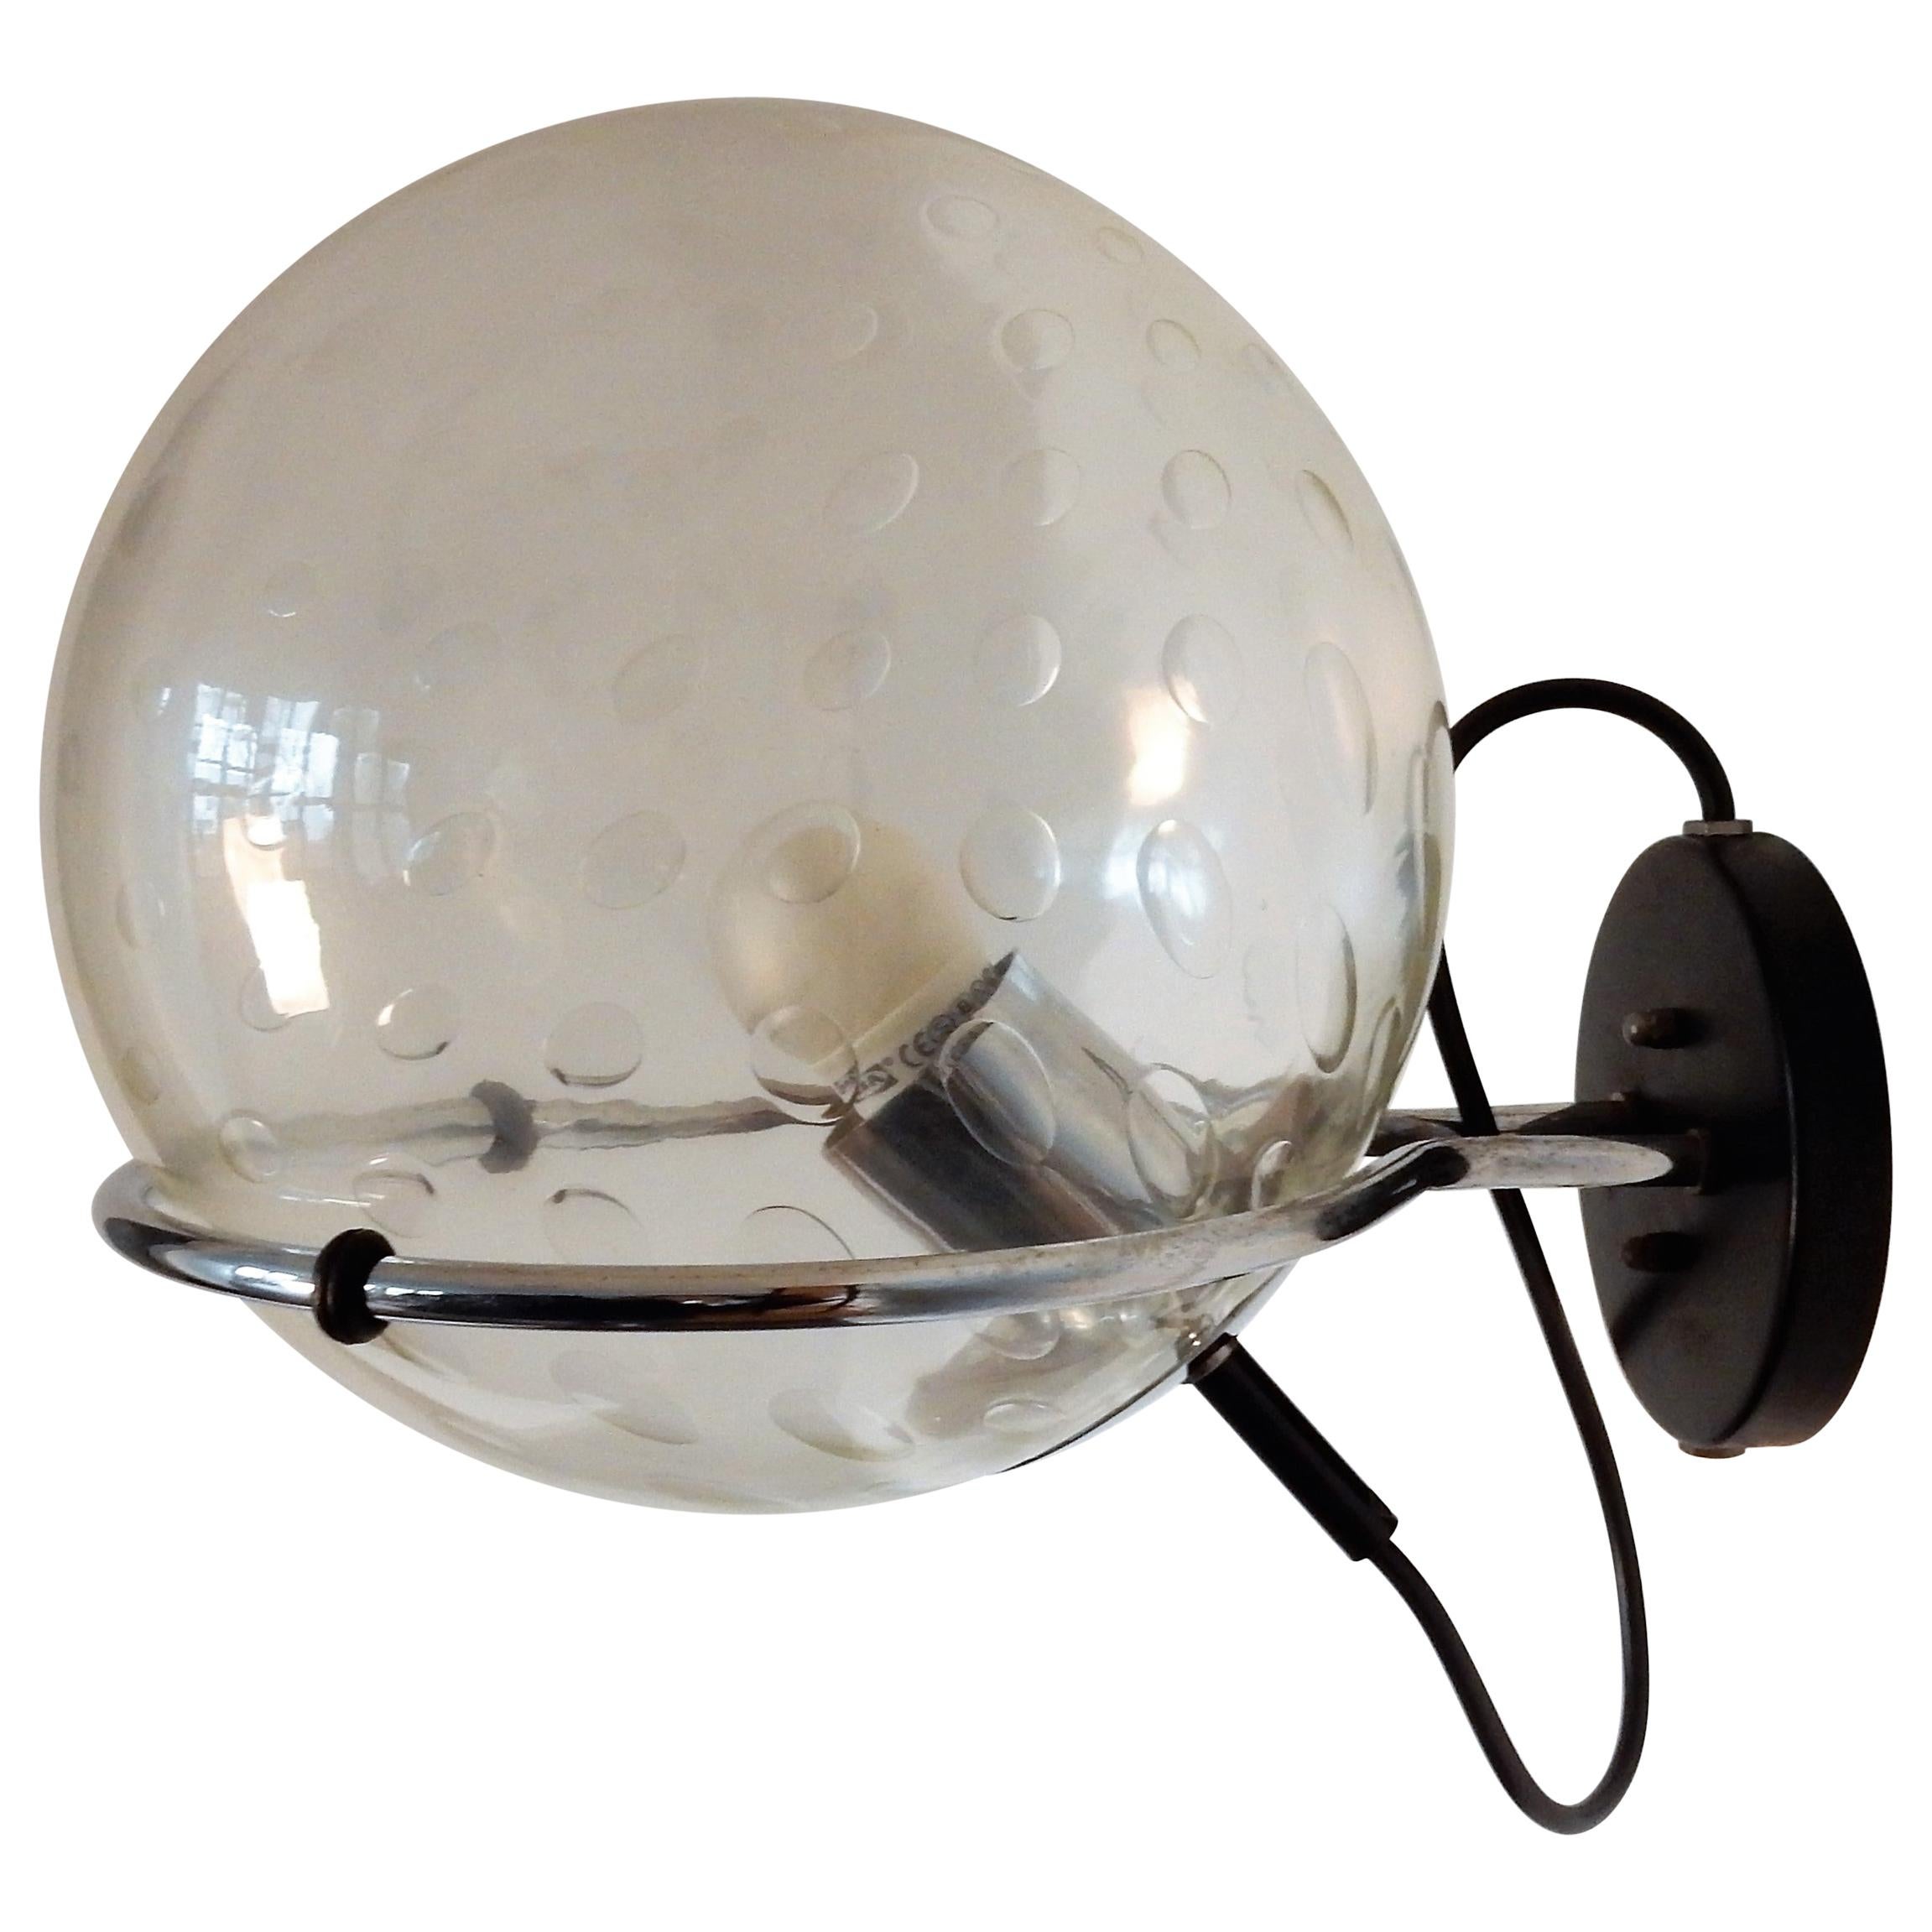 C-1725 Basket-Bol Wall Lamp with Raindrop Glass Bowl by RAAK, 14 Available